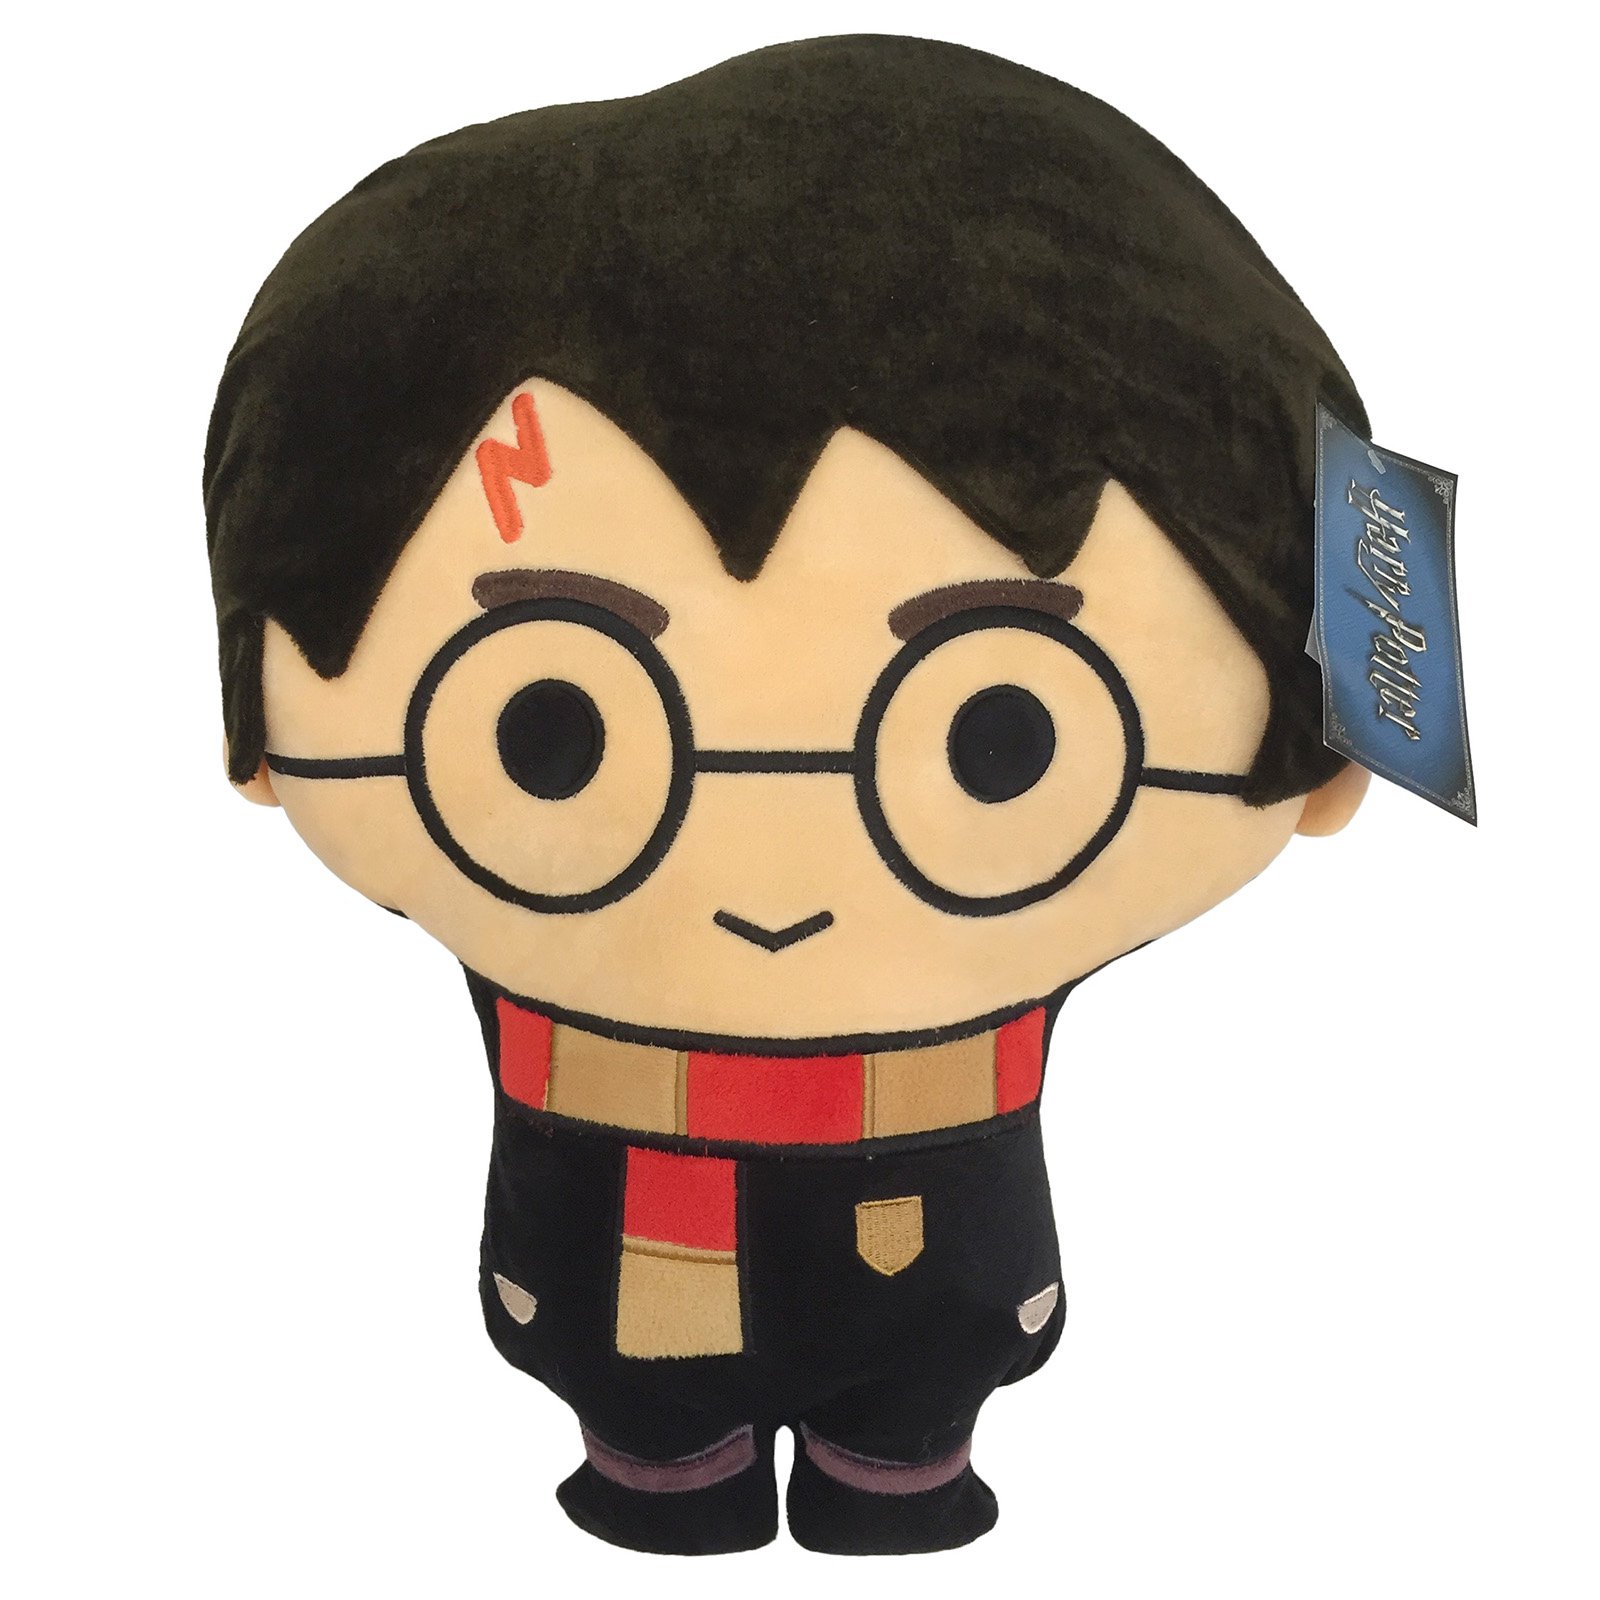 Harry Potter Plush Stuffed Kids Pillow Buddy, Polyester, Multicolor - image 1 of 2